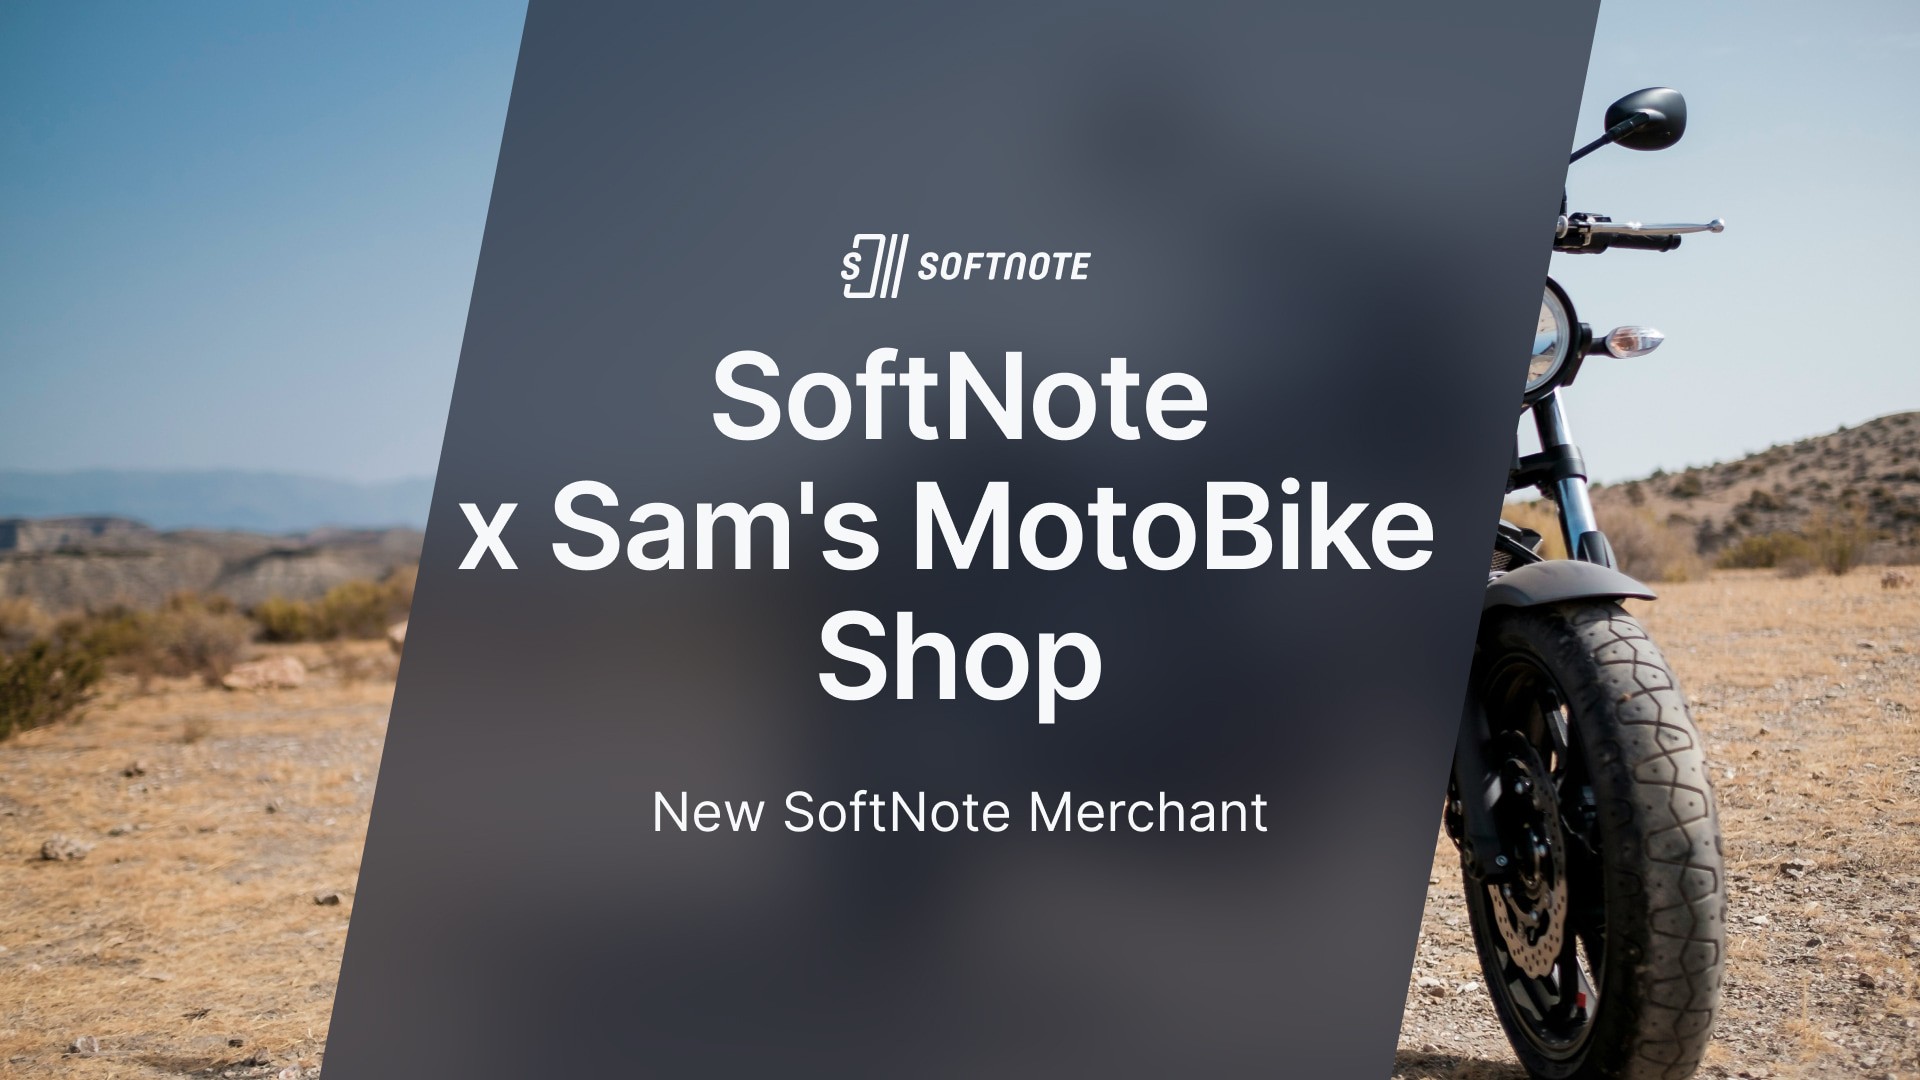 Tectum Breaks Into The African Market and Announces Sam’s MotoBike Shop as a New SoftNote Merchant